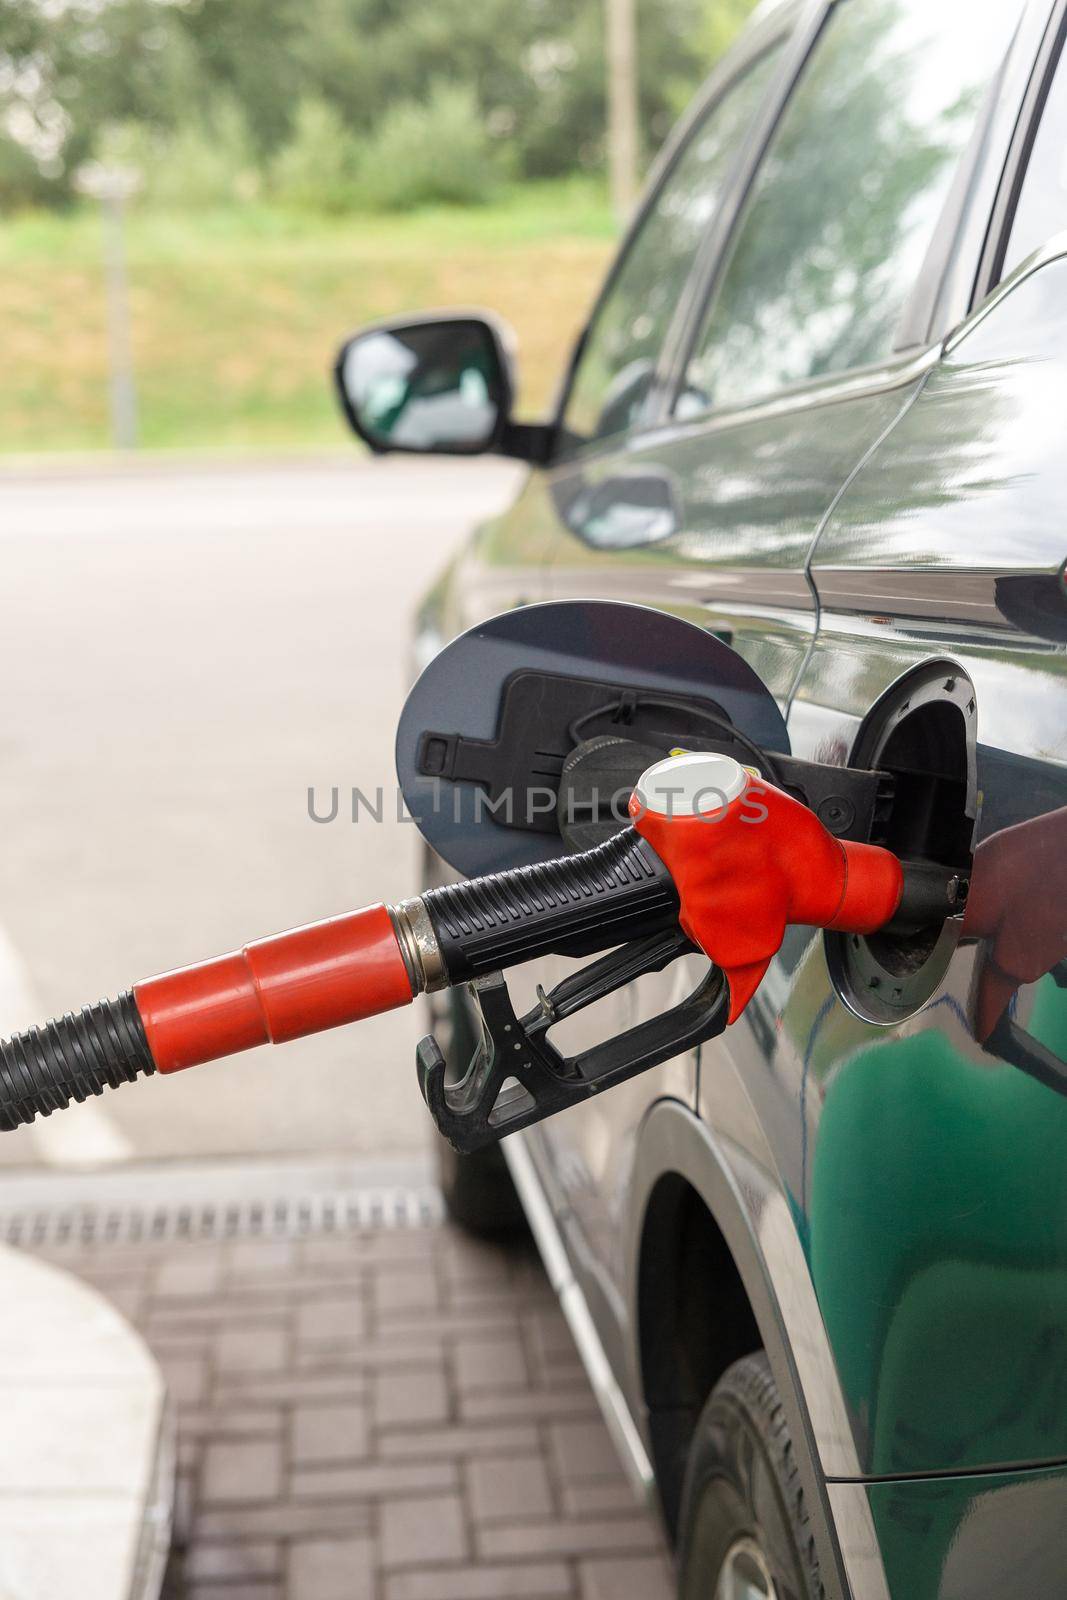 Fuel nozzle to refill fuel in car at gas station. Red fuel dispenser on gray car in petro station.